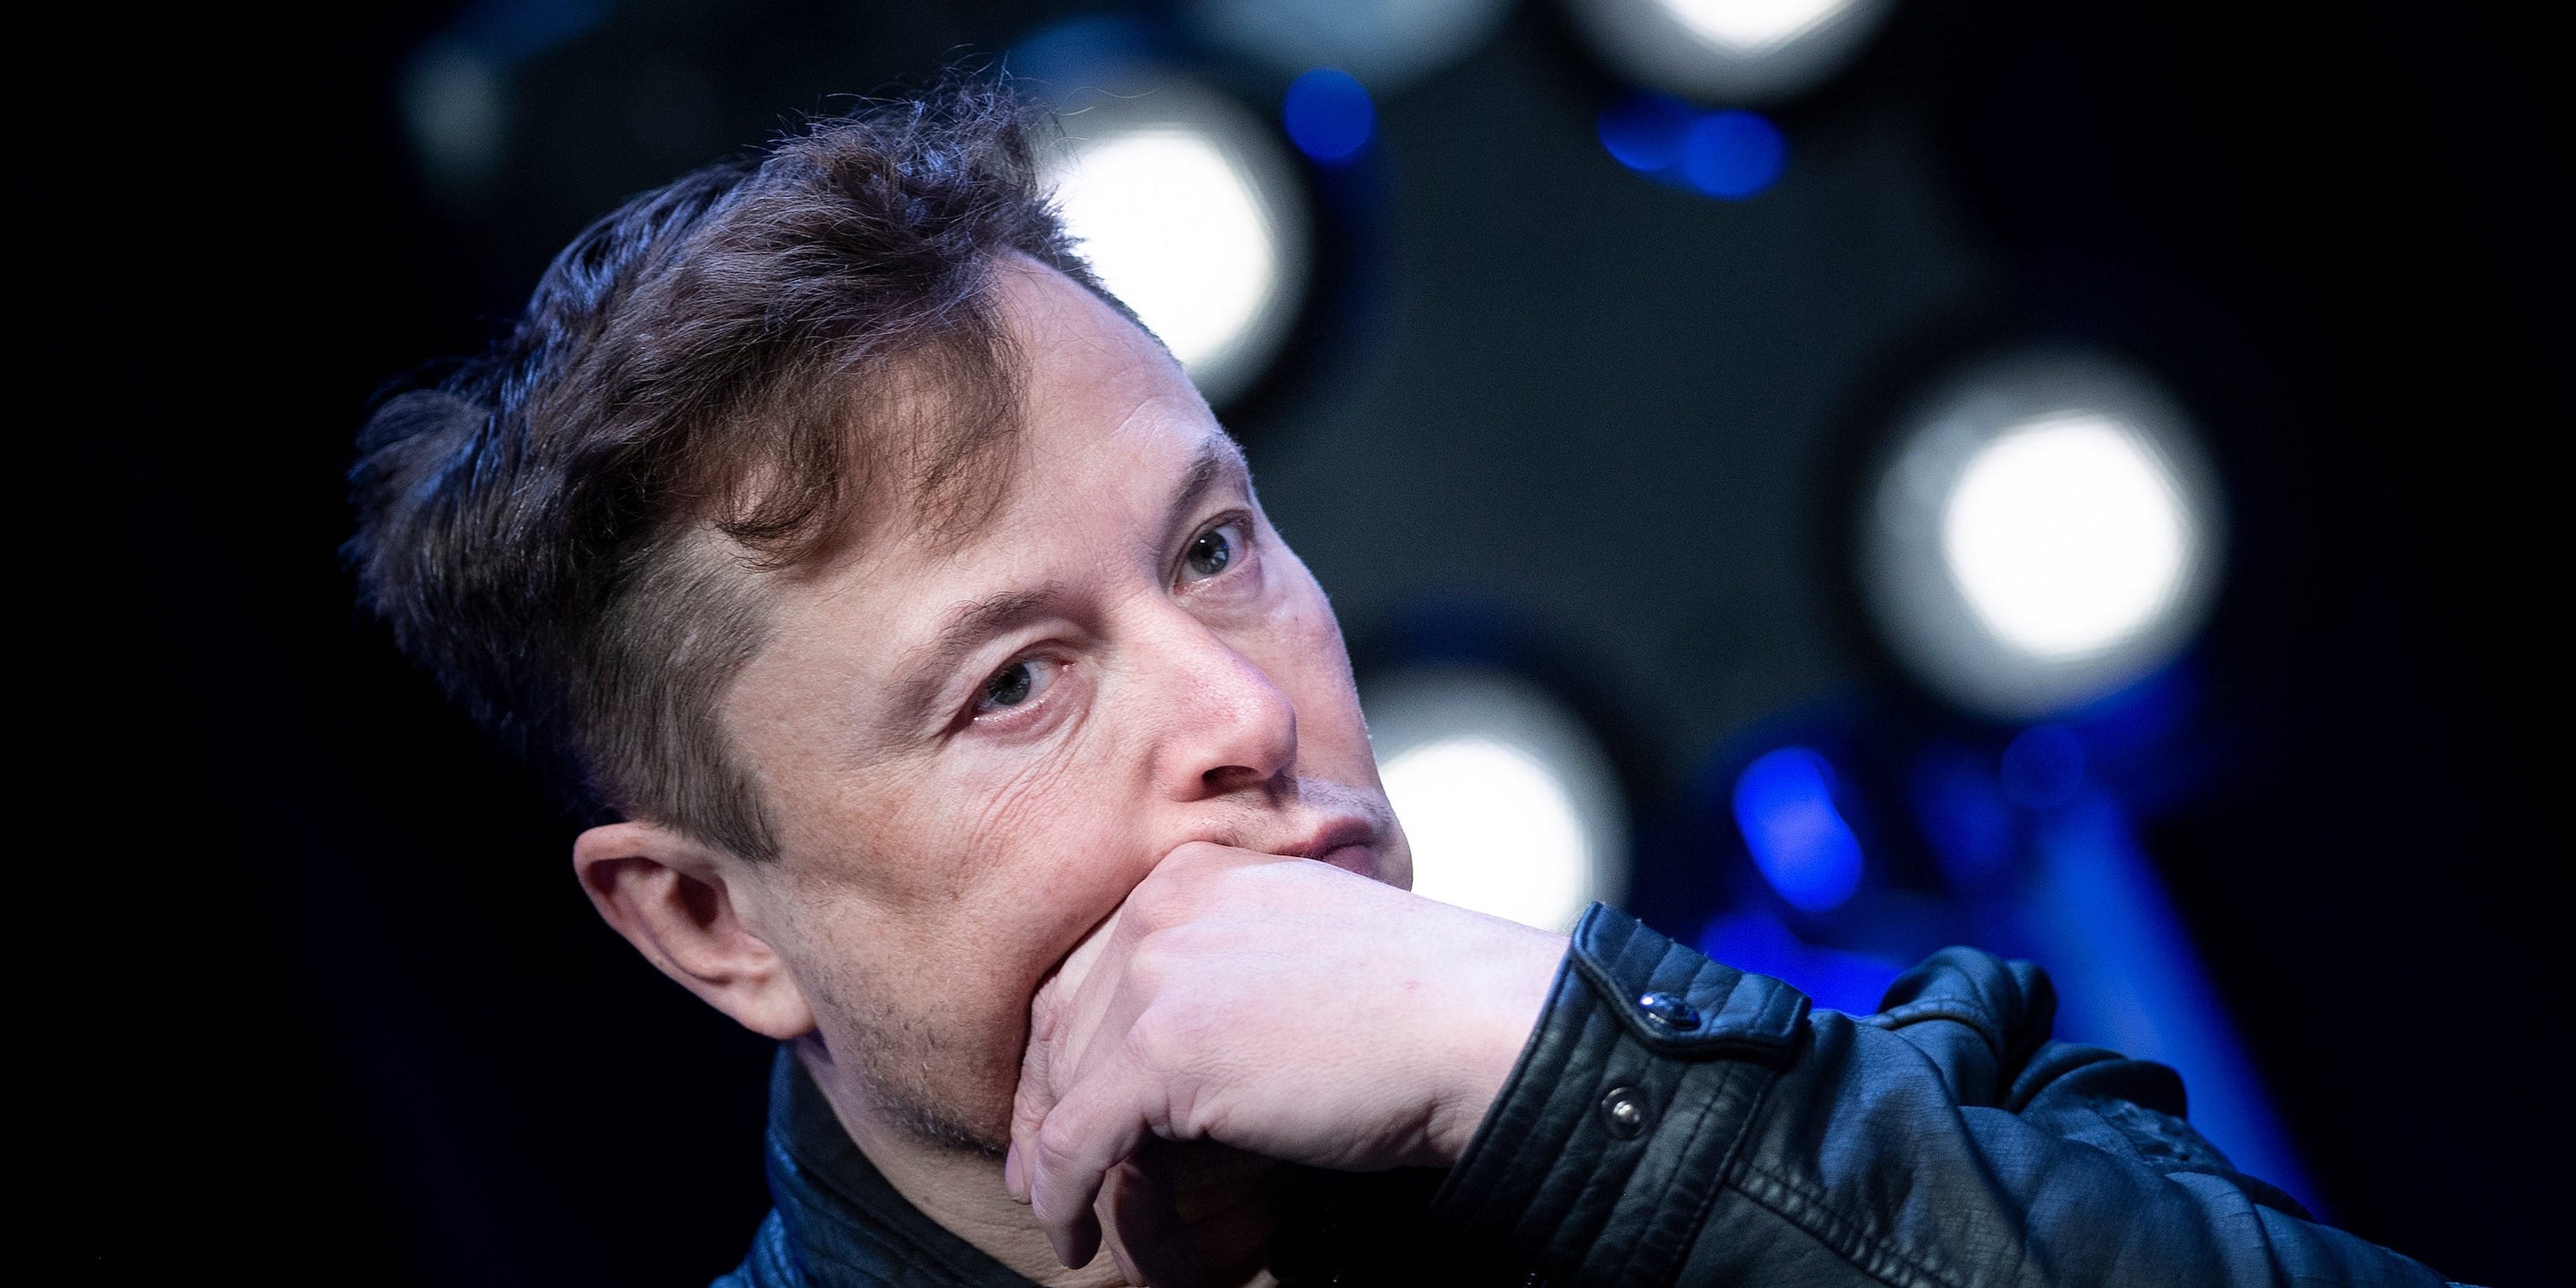 amazon, microsoft, elon musk's wealth has crashed by $160 billion from its peak as tesla's problems pile up